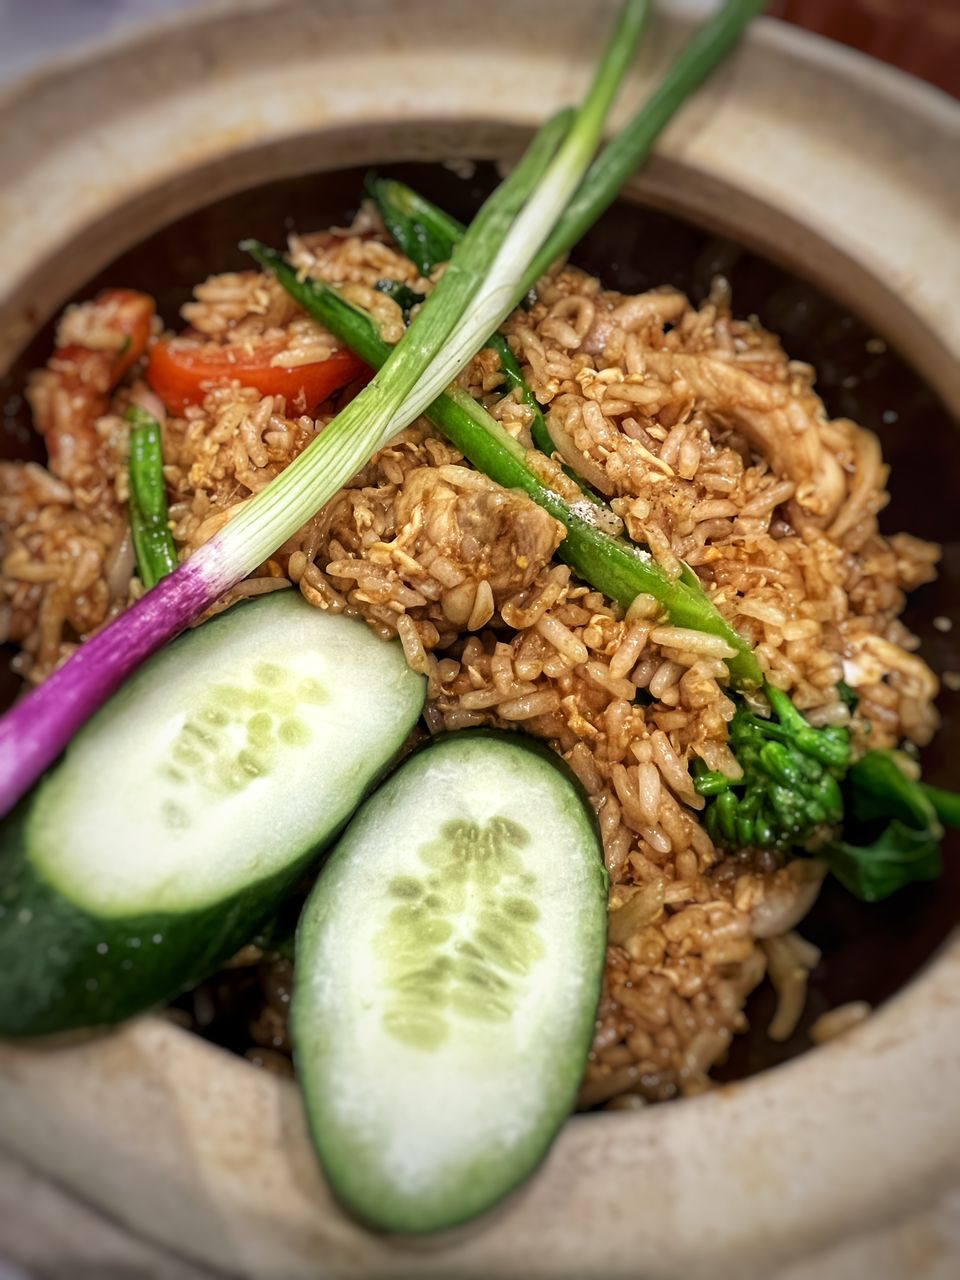 Khiang Chicken Fried Rice